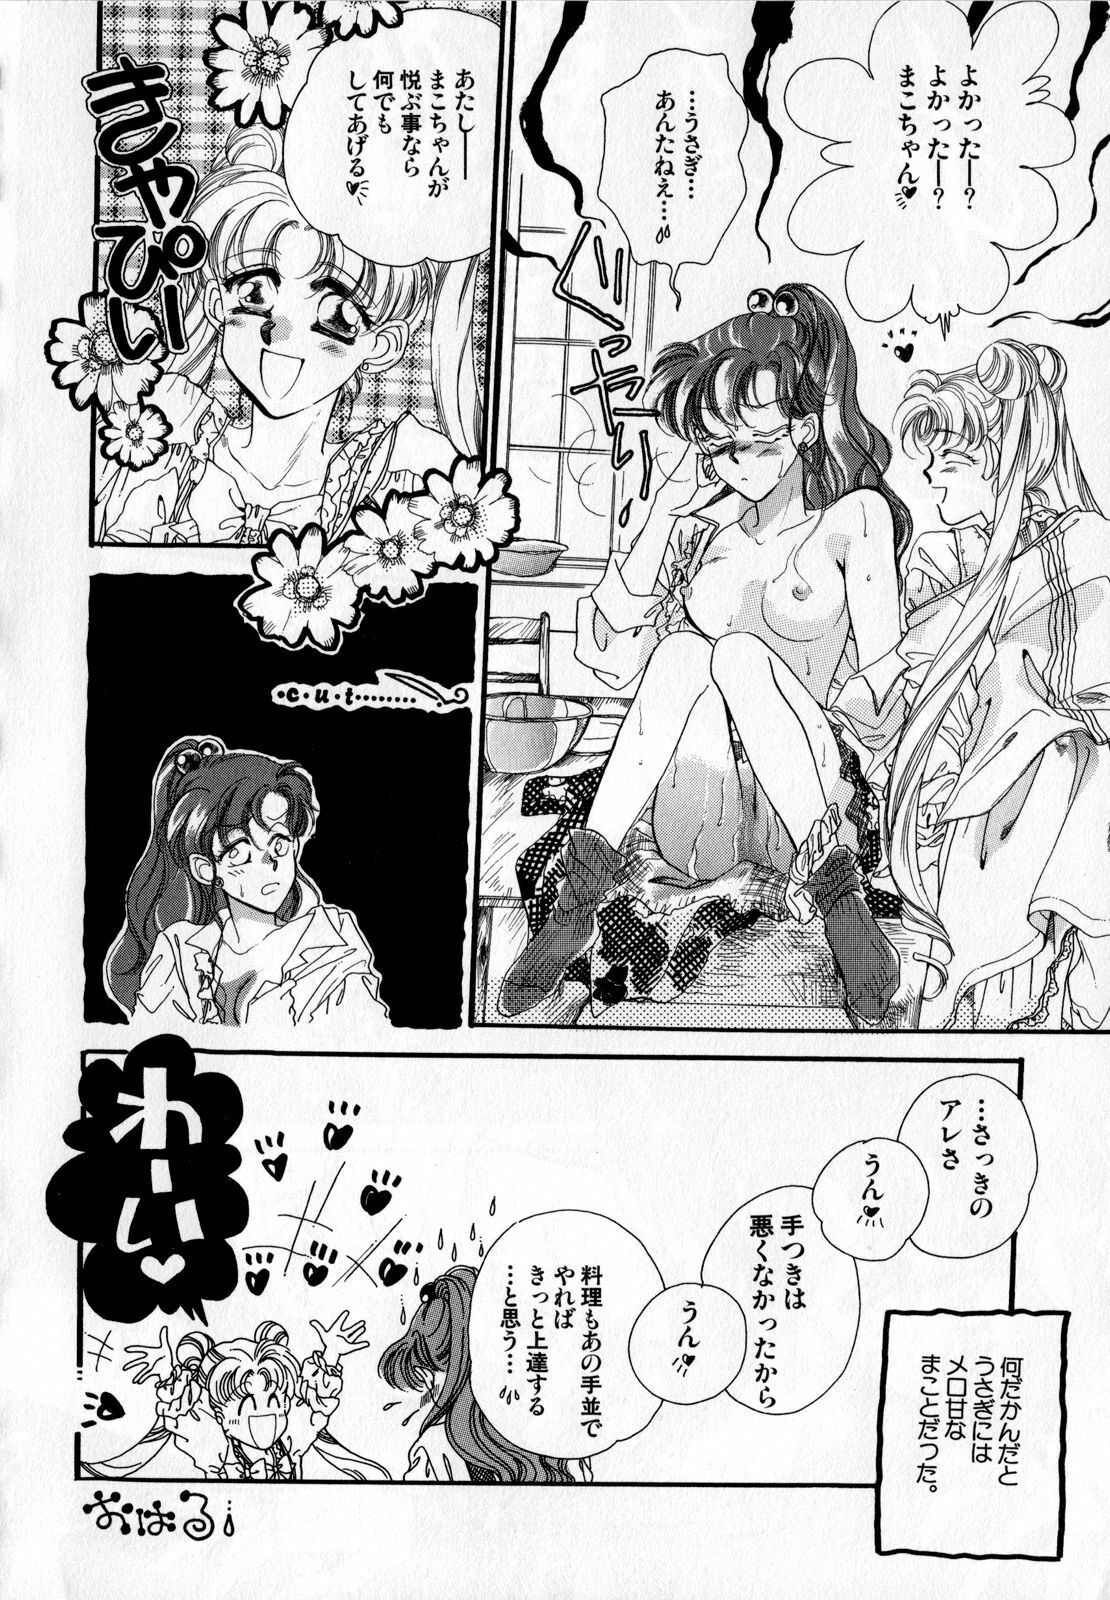 [Anthology] Lunatic Party 2 (Sailor Moon) page 13 full